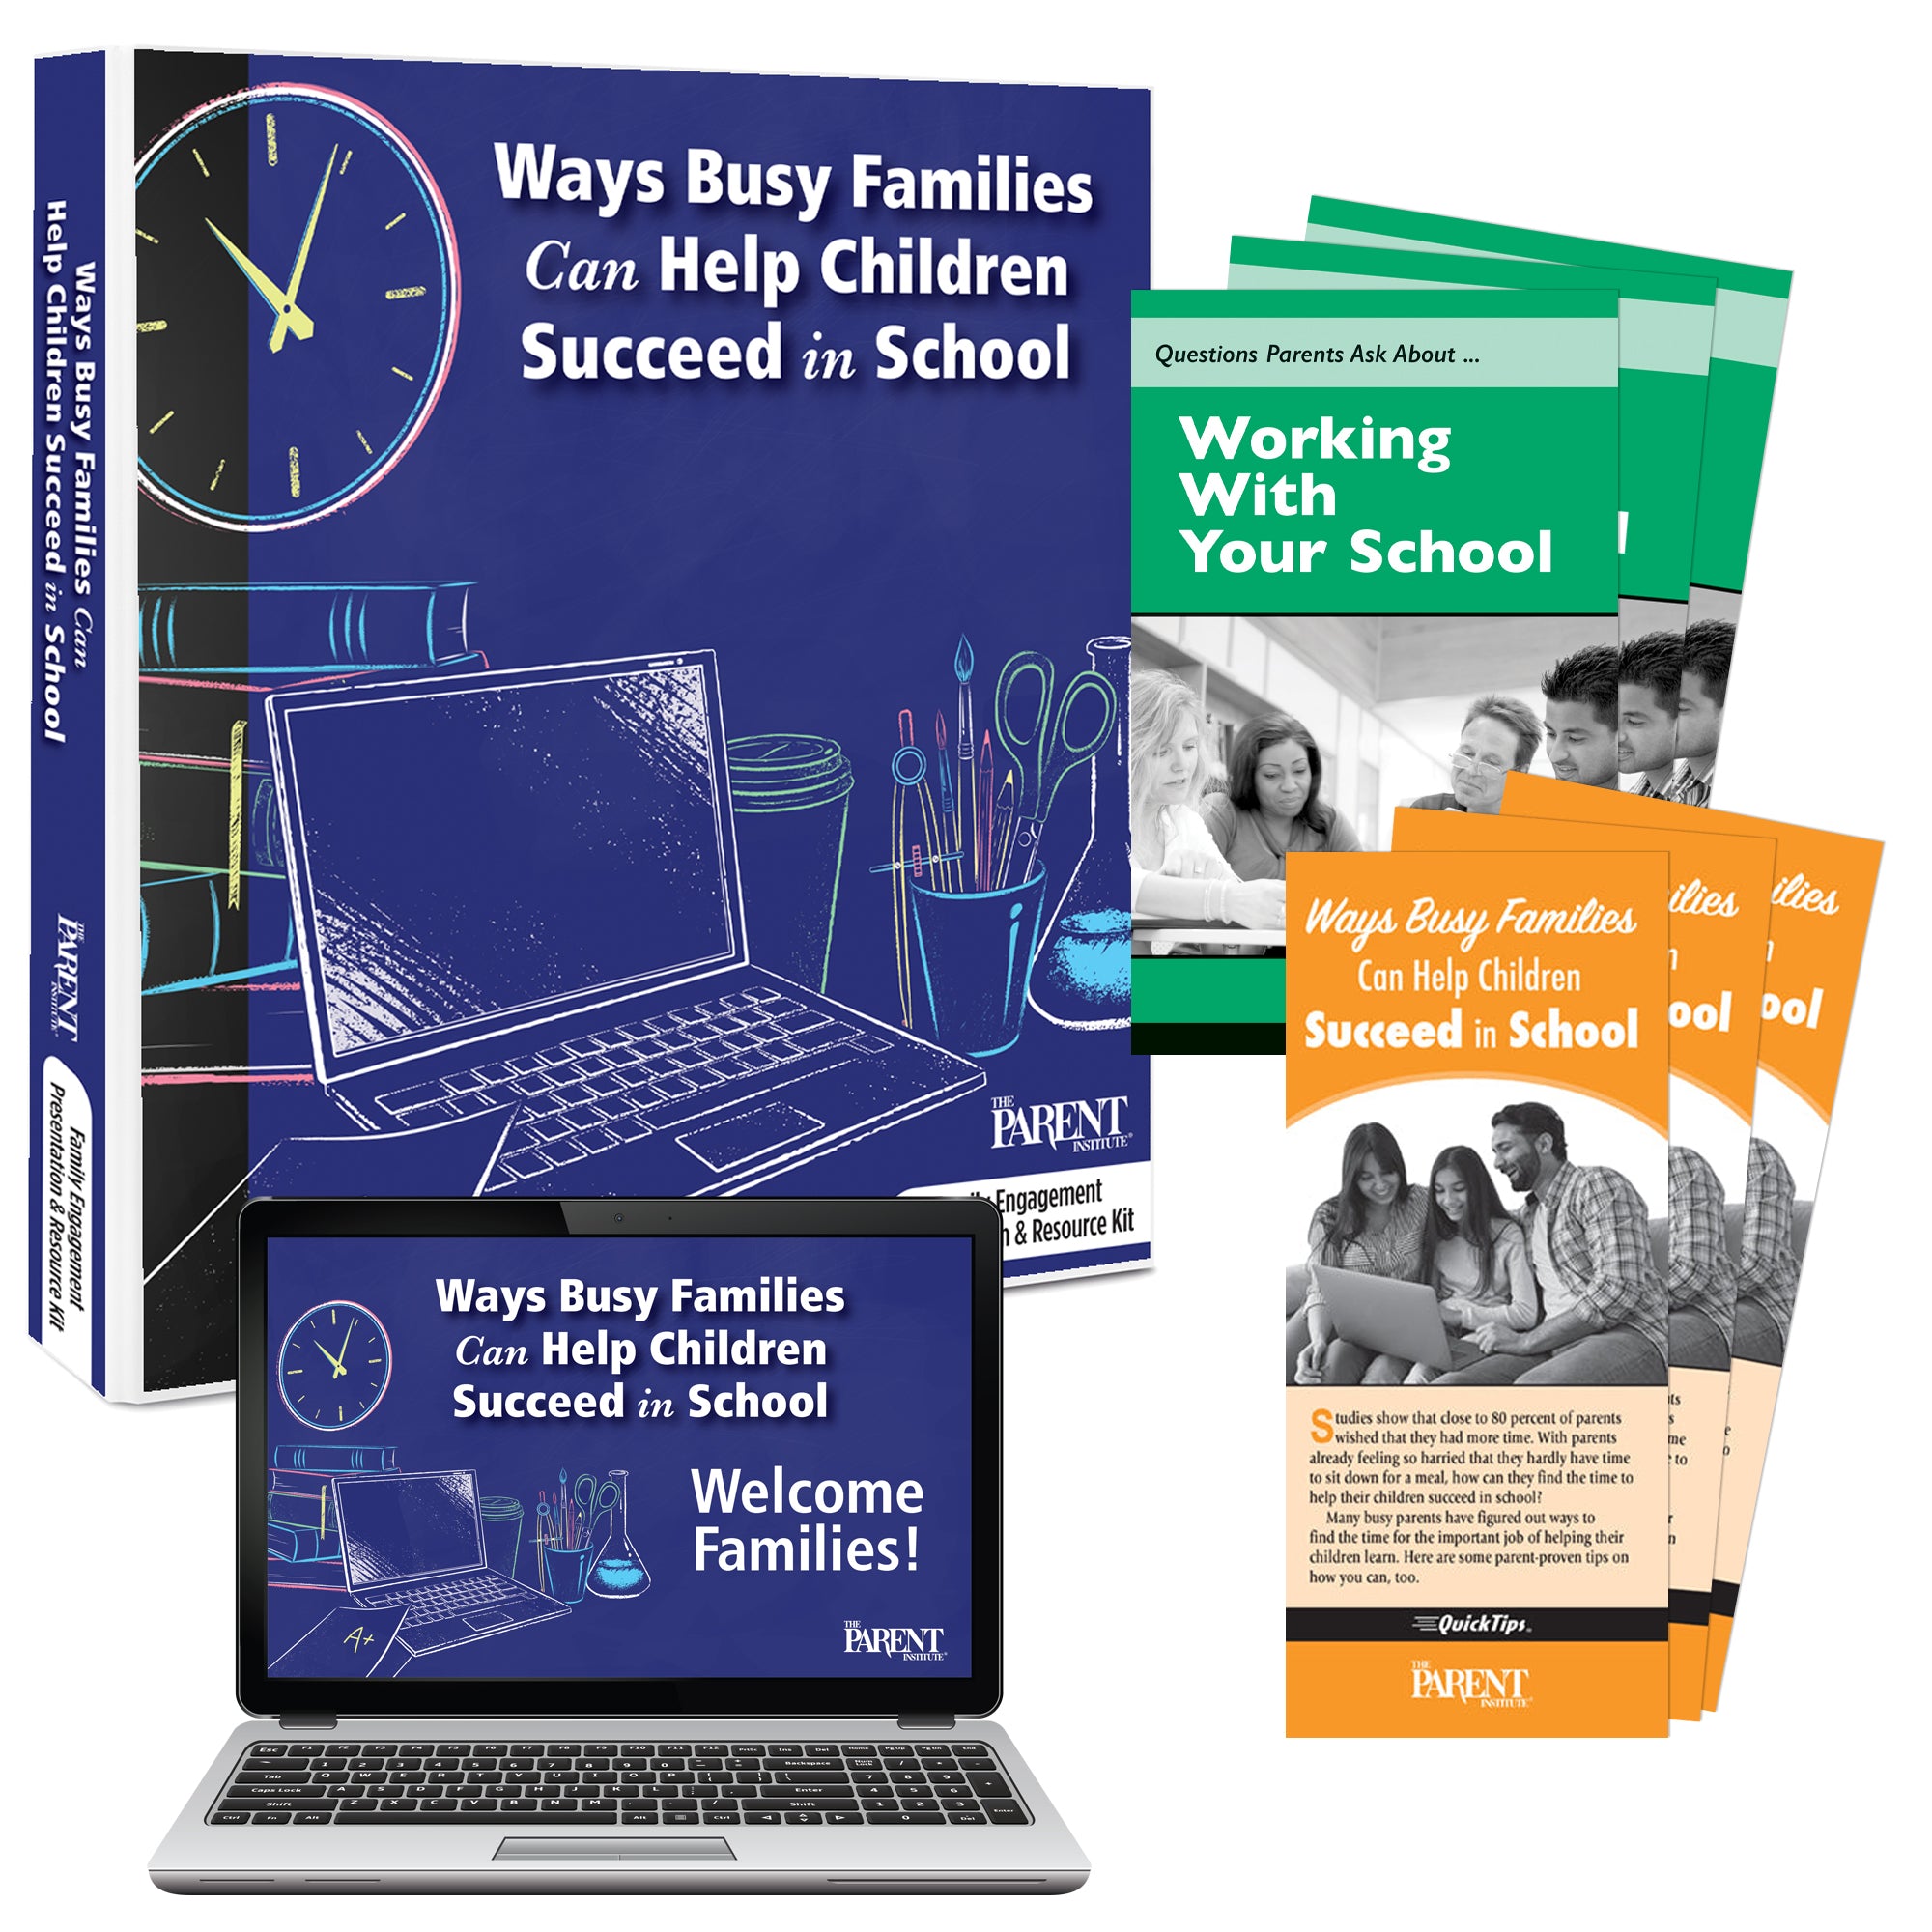 Ways Busy Families Can Help Children Succeed in School Resource Kit